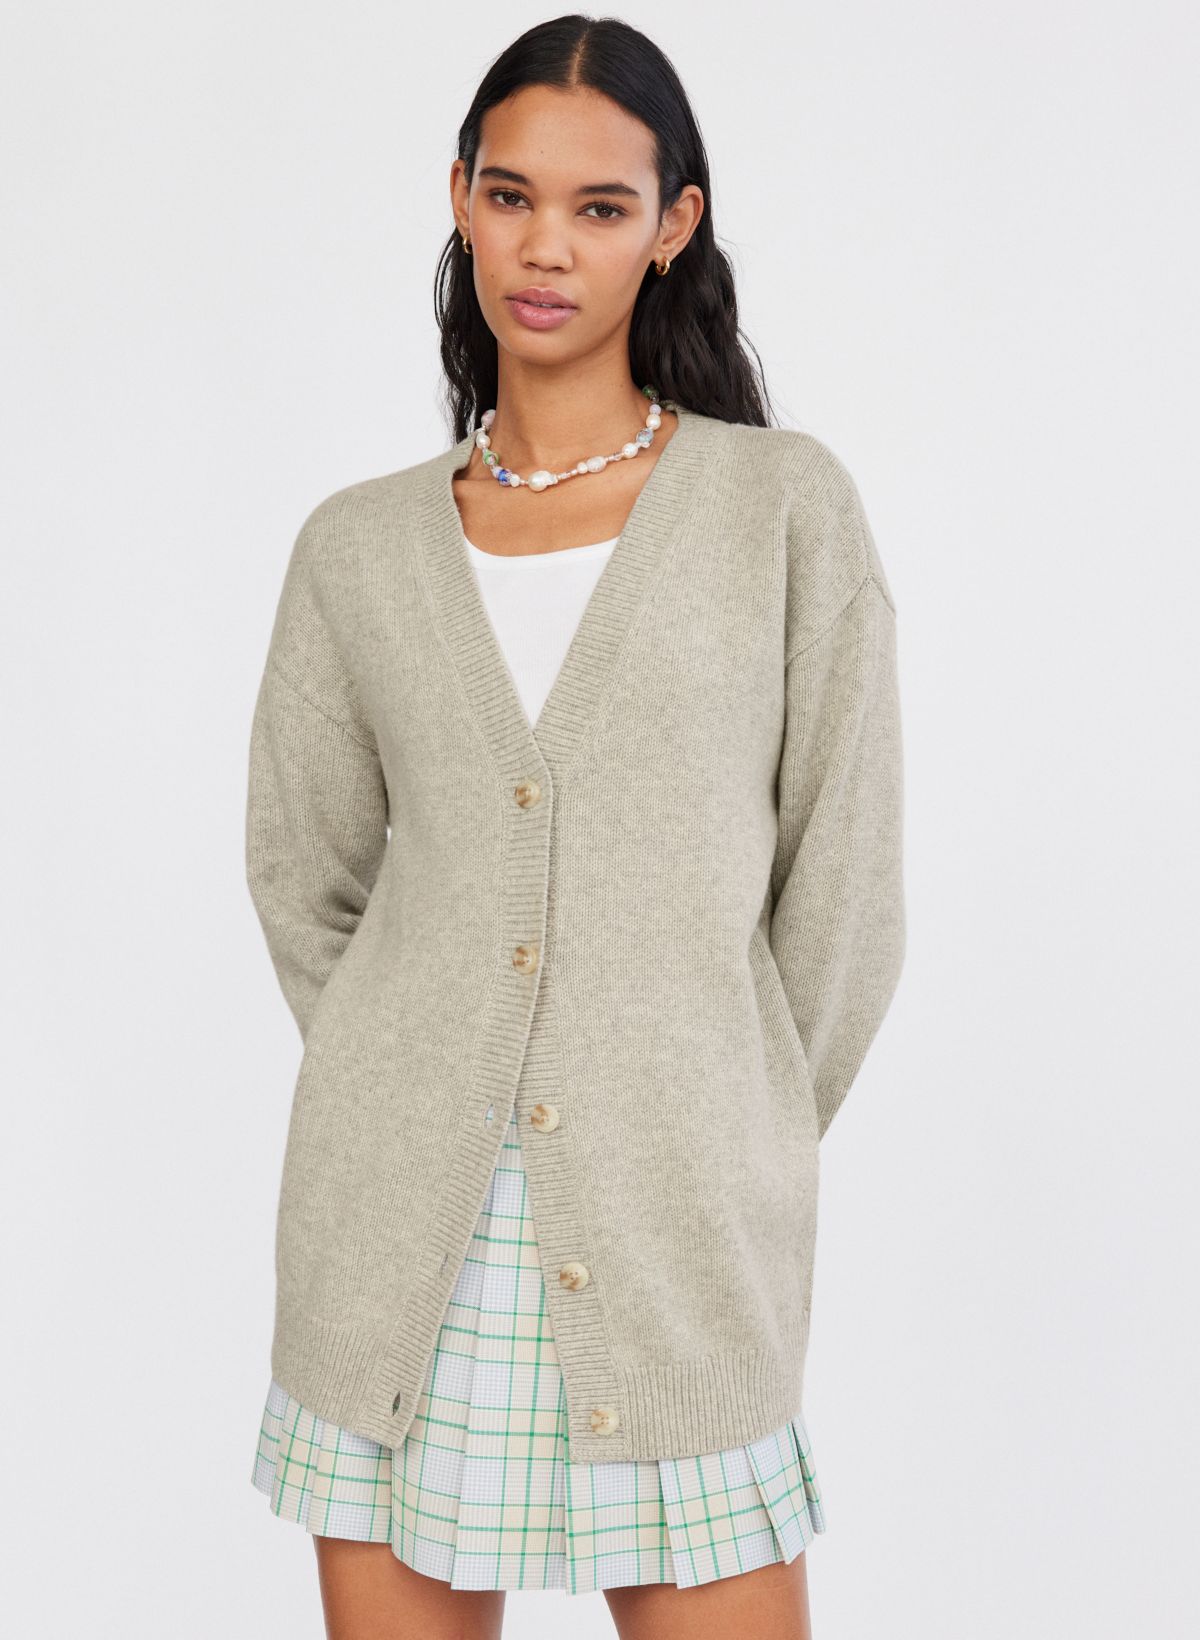 29 Ridiculously Cozy Oversized Cardigans You'll Want To Wear ASAP